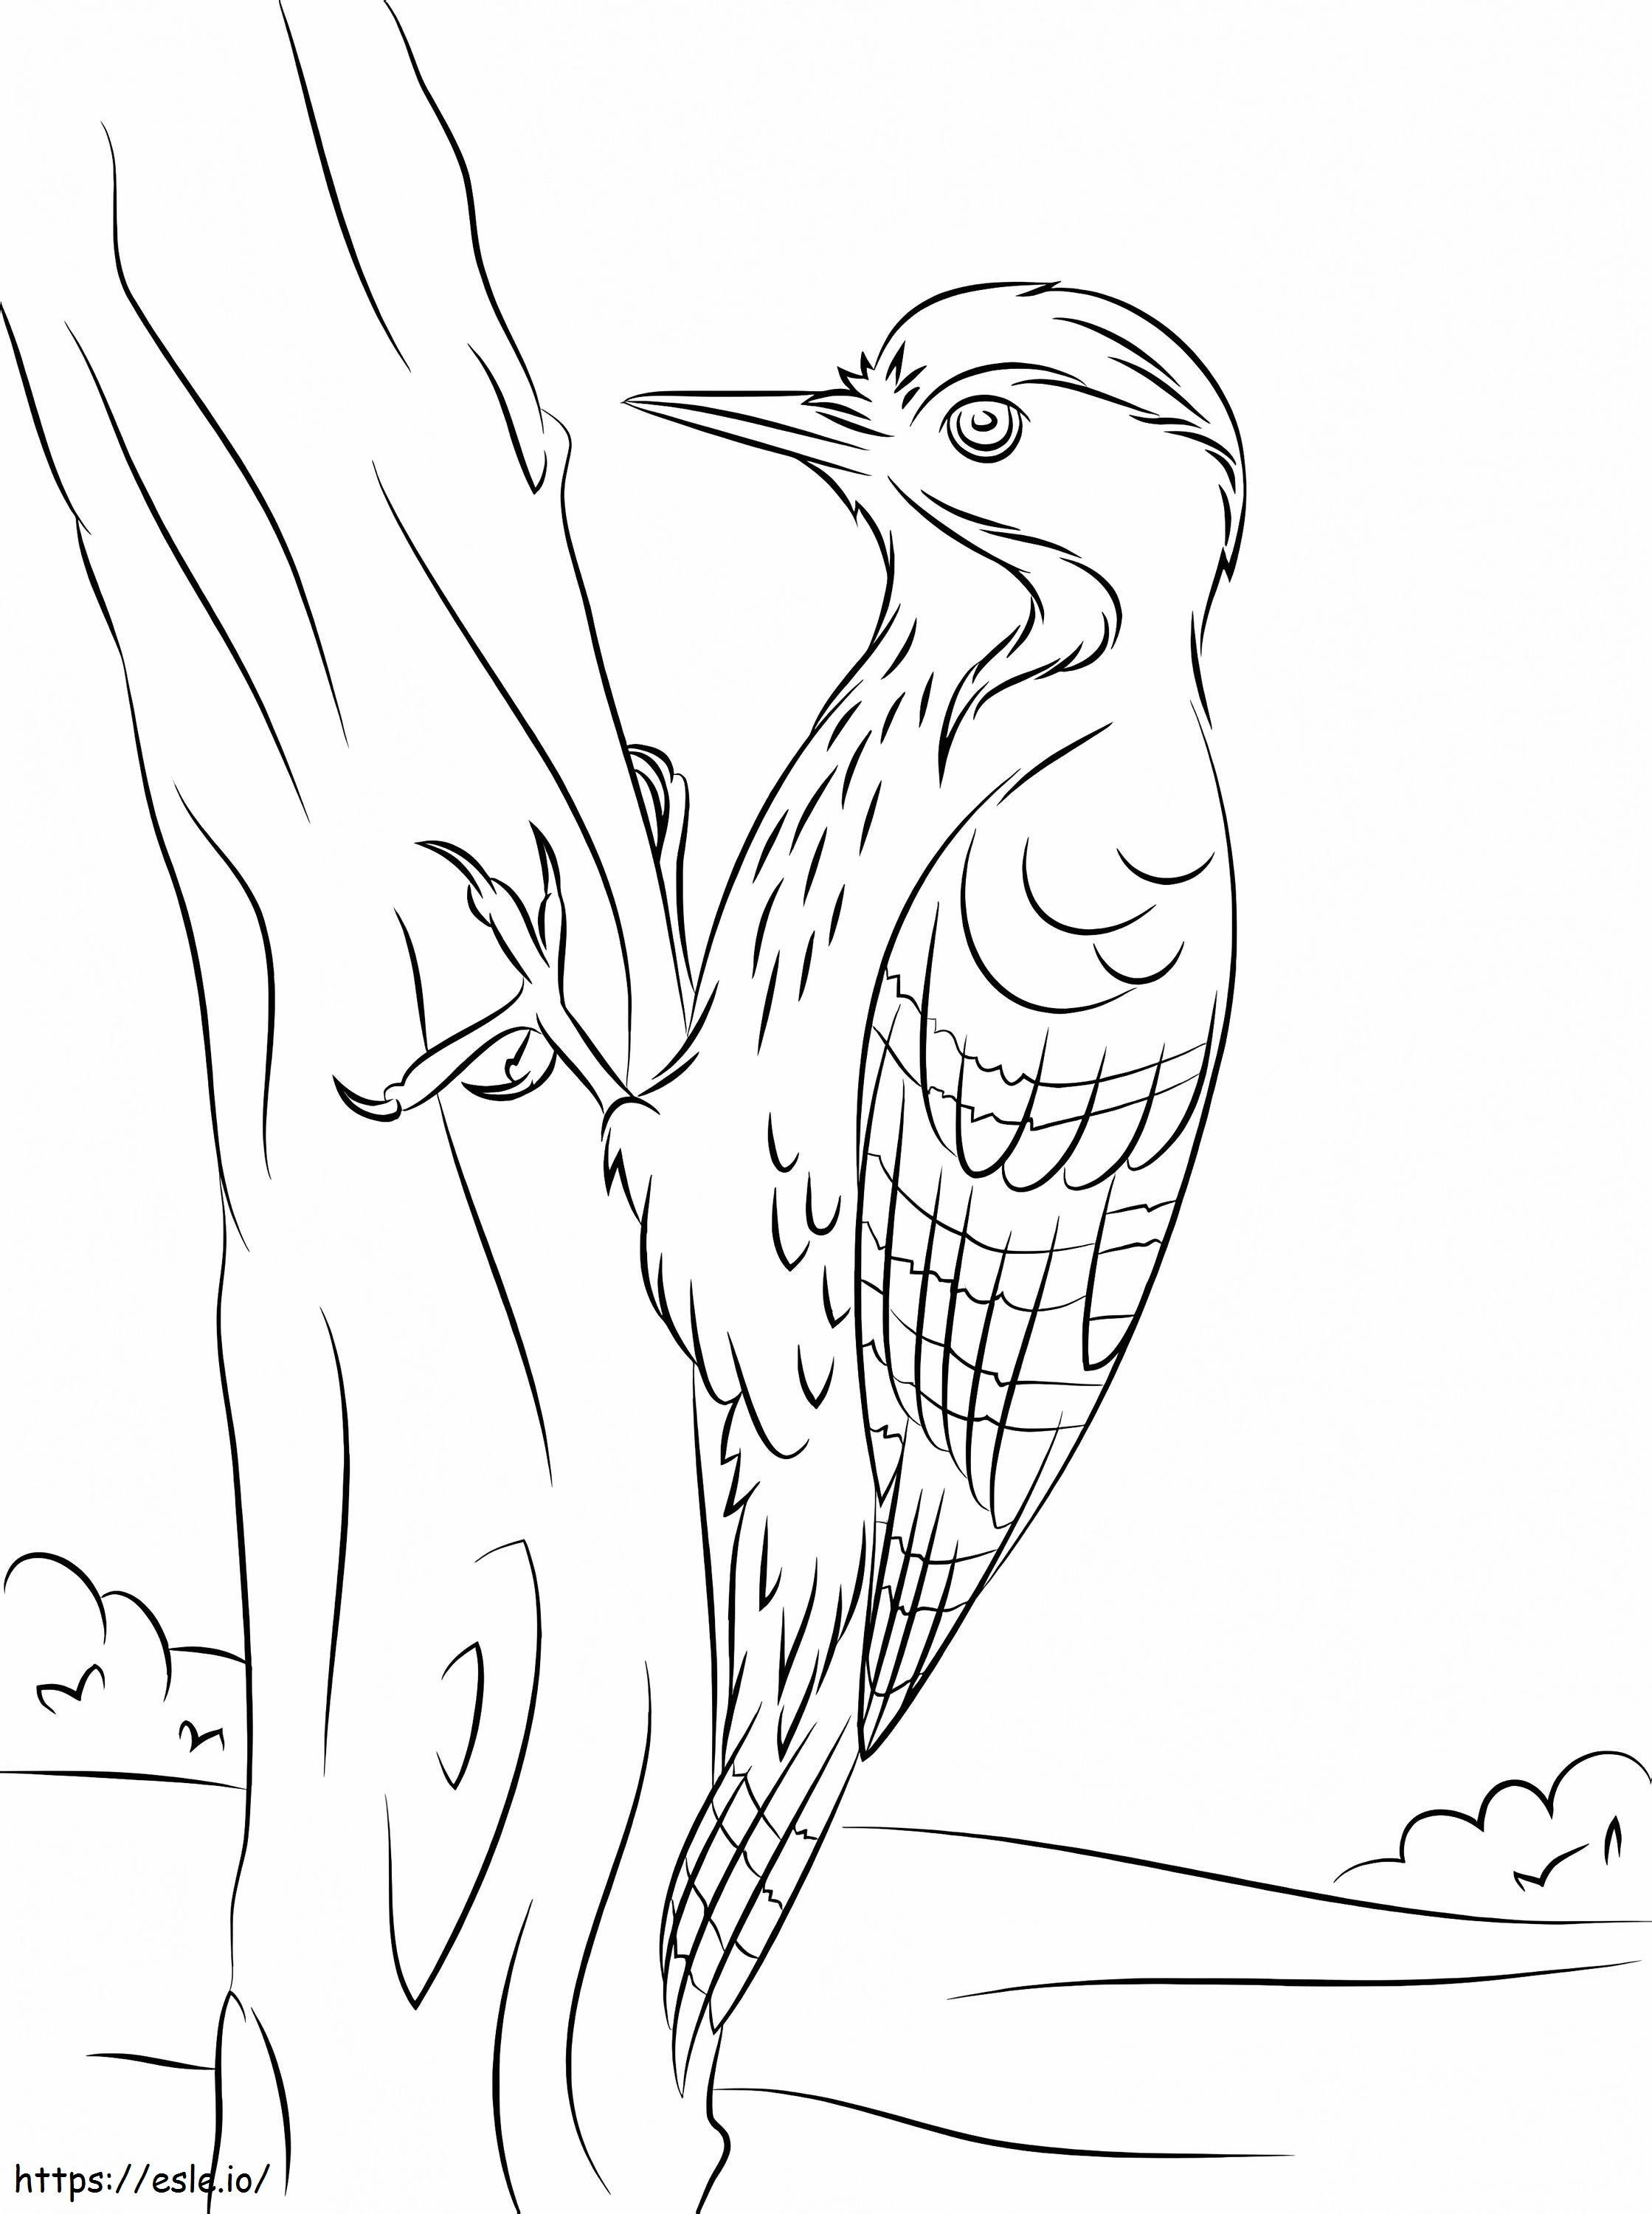 Fulvous Breasted Woodpecker coloring page